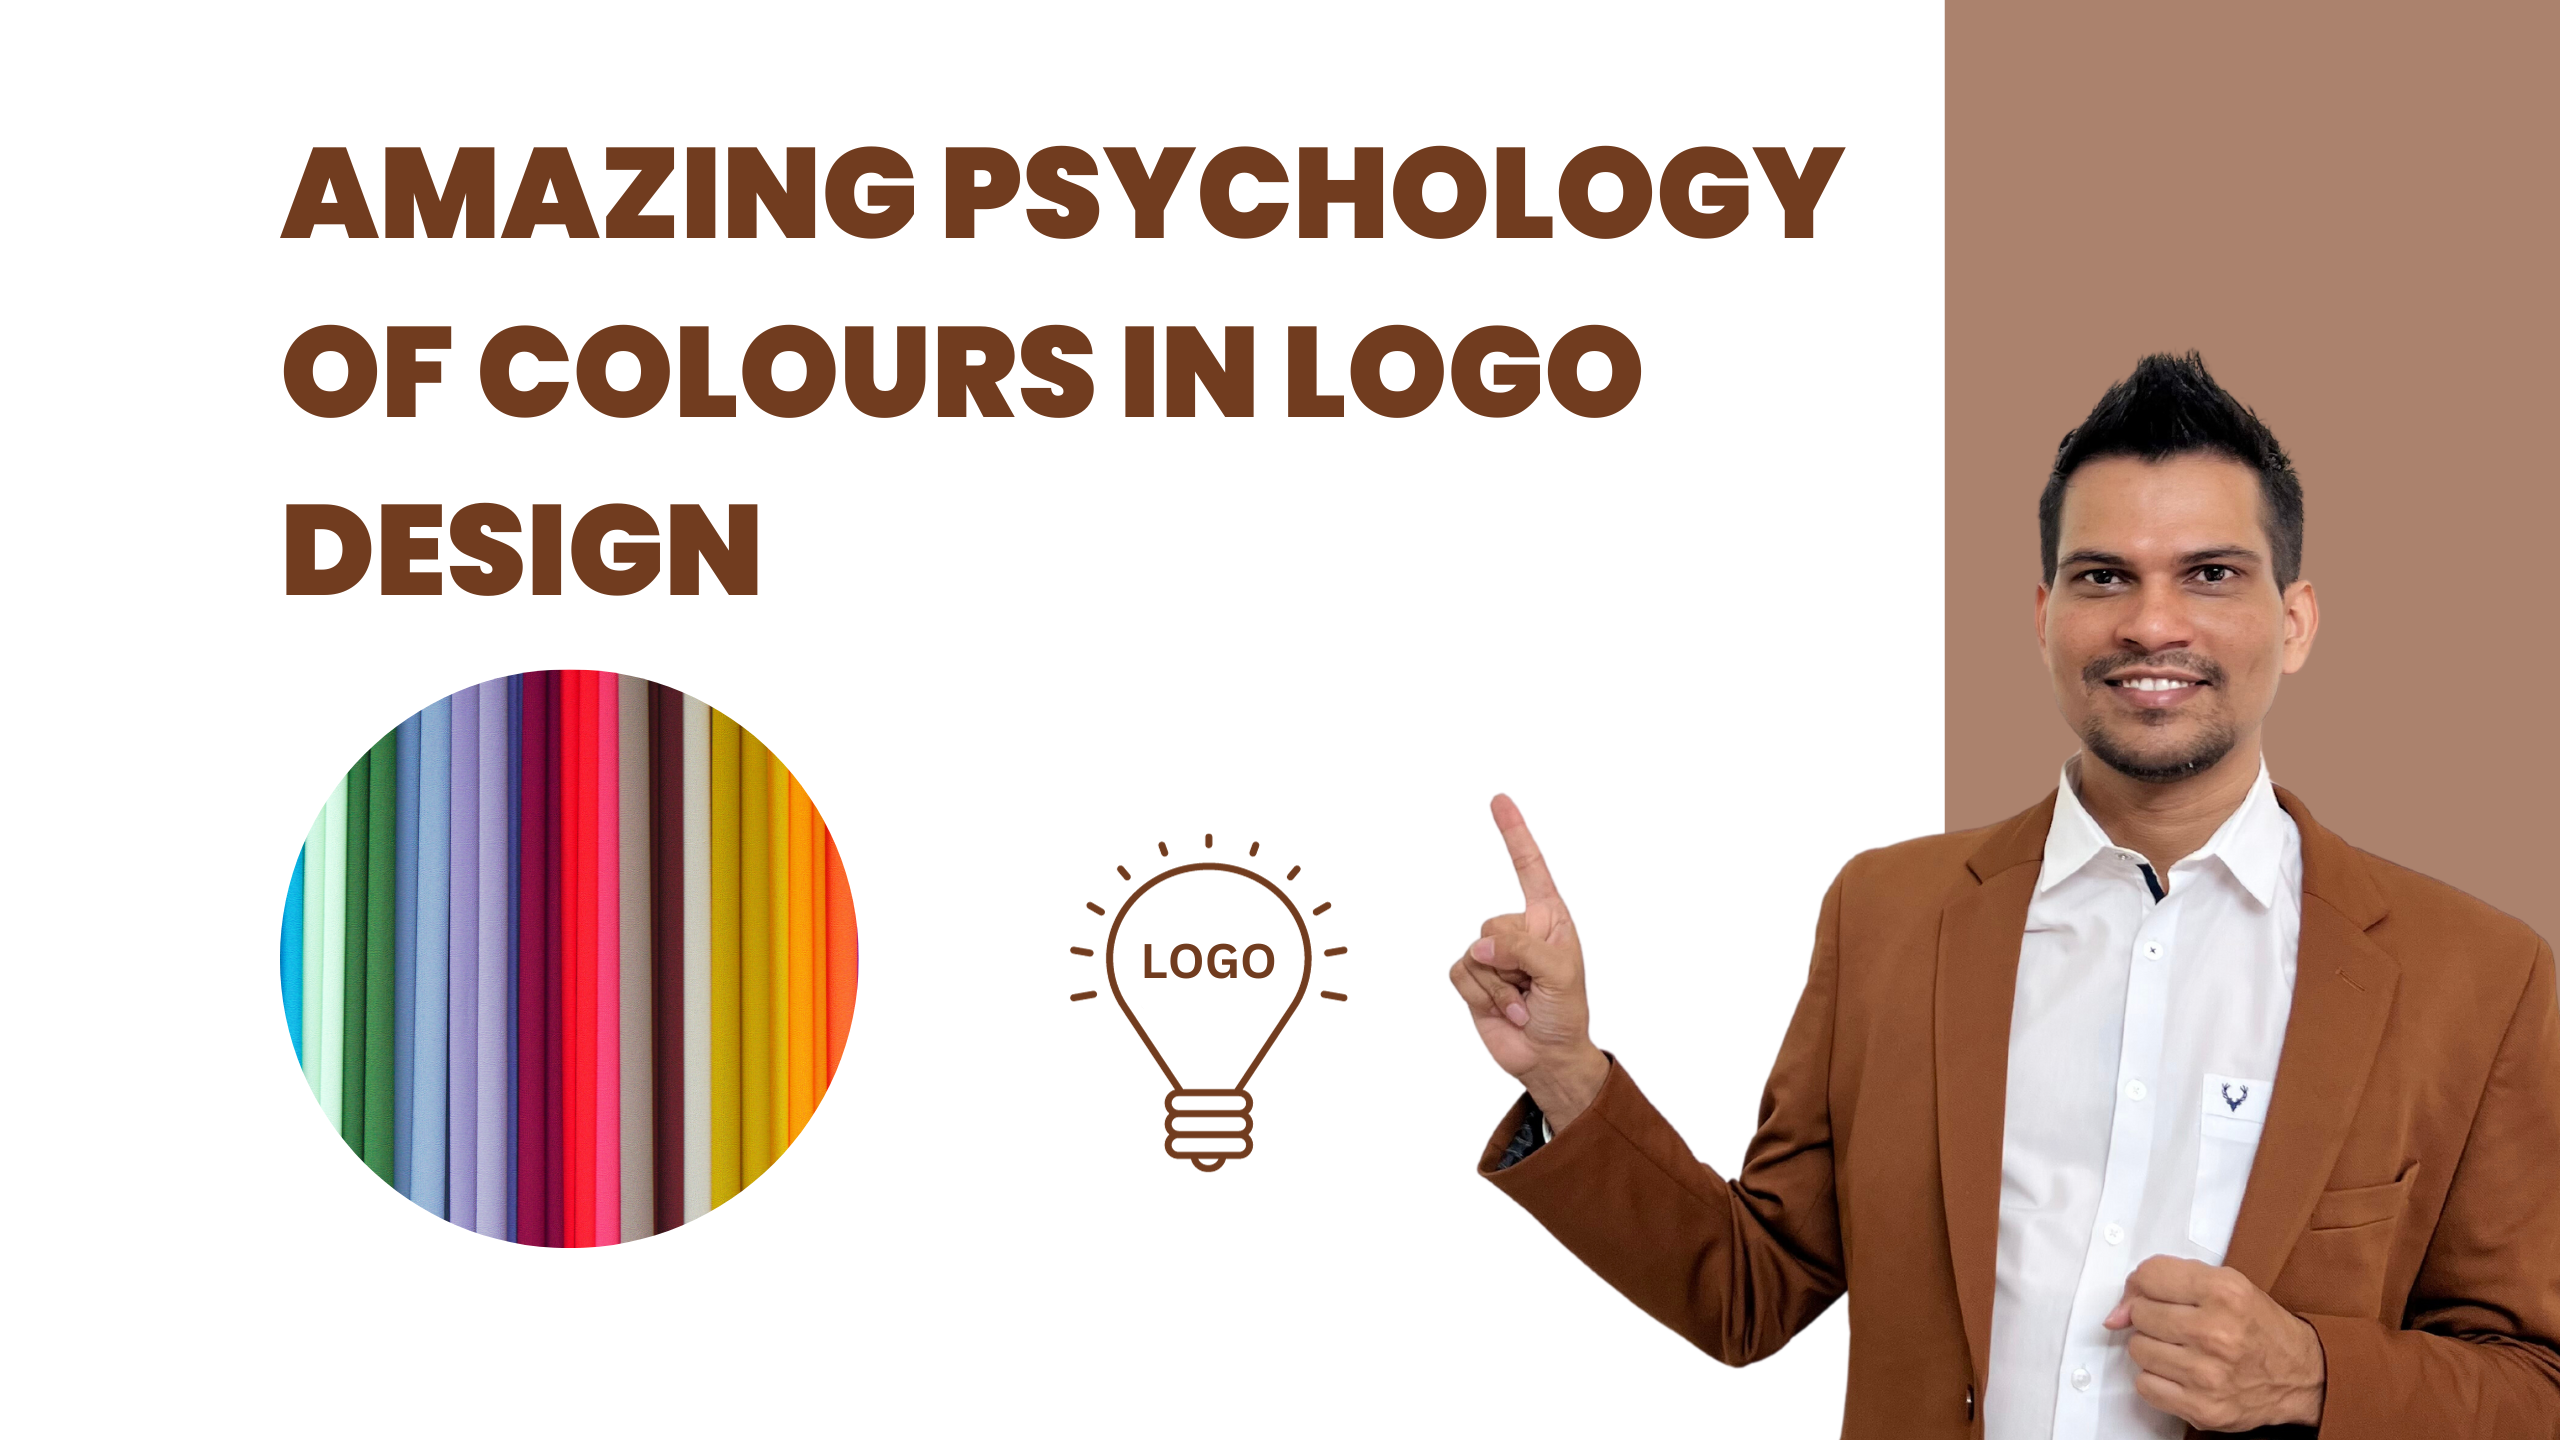 Psychology of Colours, Amazing Psychology of Colours in Logo Design, Scientific Logo by Subhash